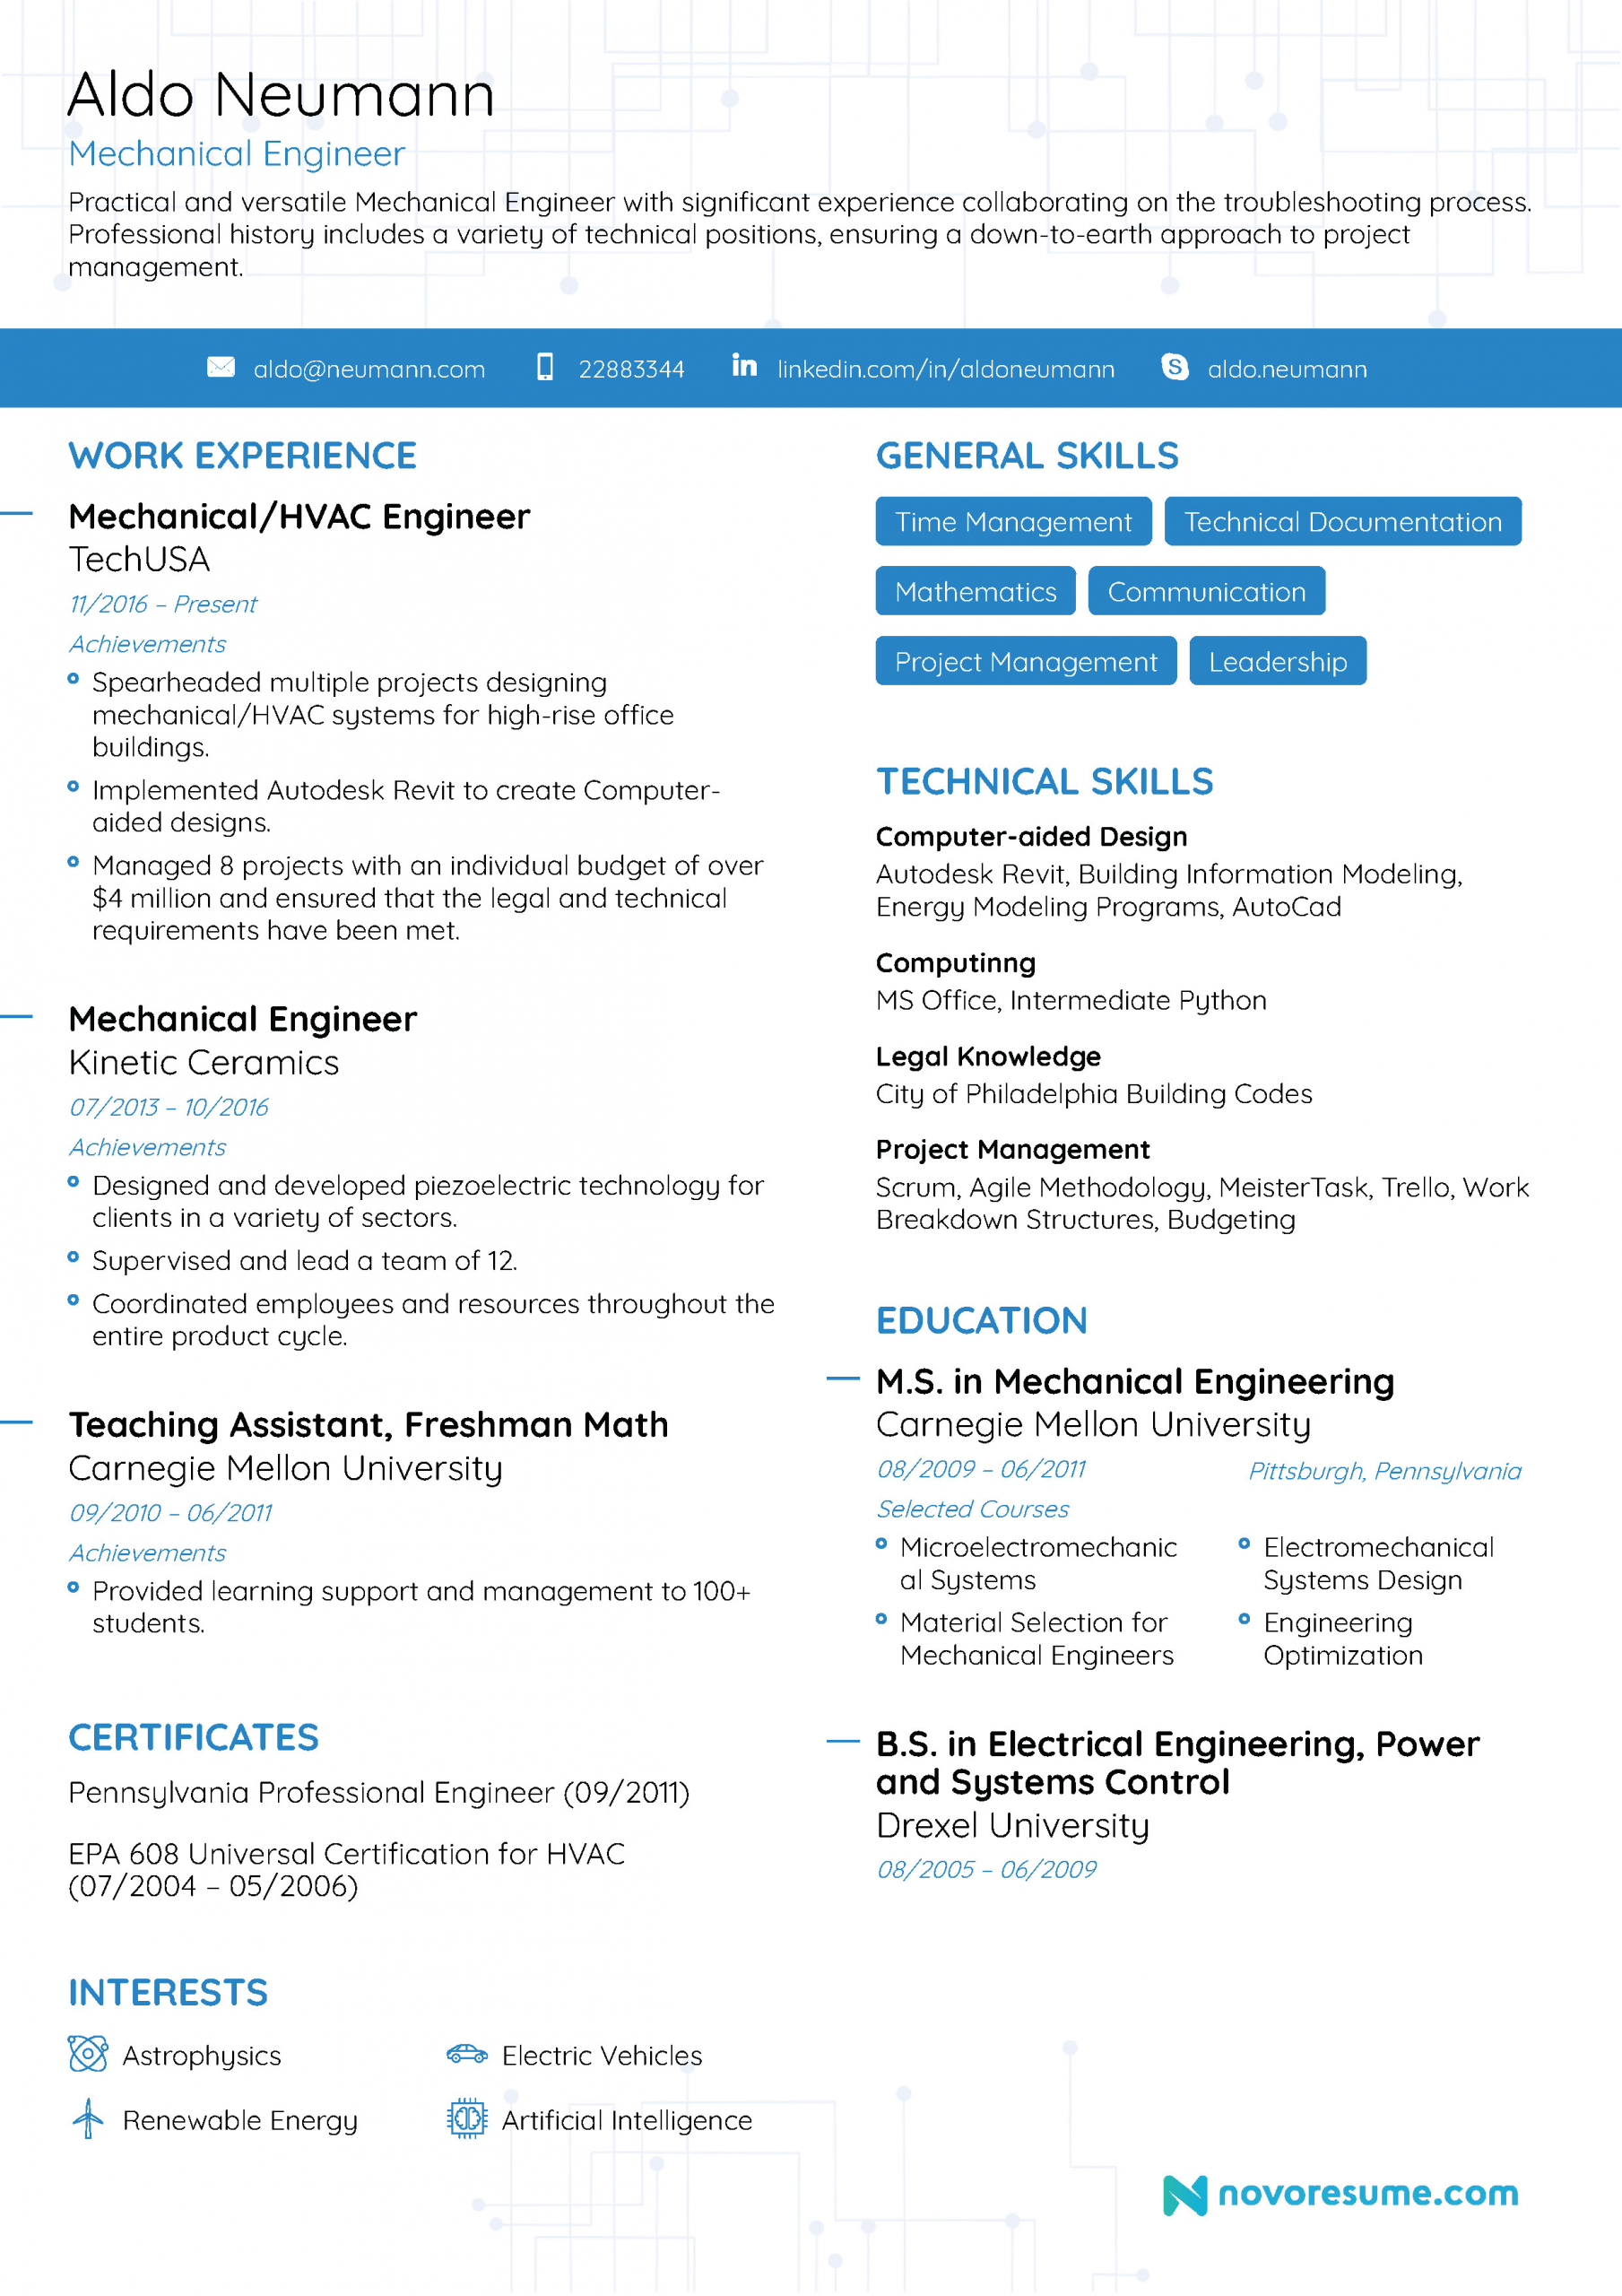 Professional Summary Resume Sample for Mechanical Engineer Engineering Resume Sample [w Examples & Template]